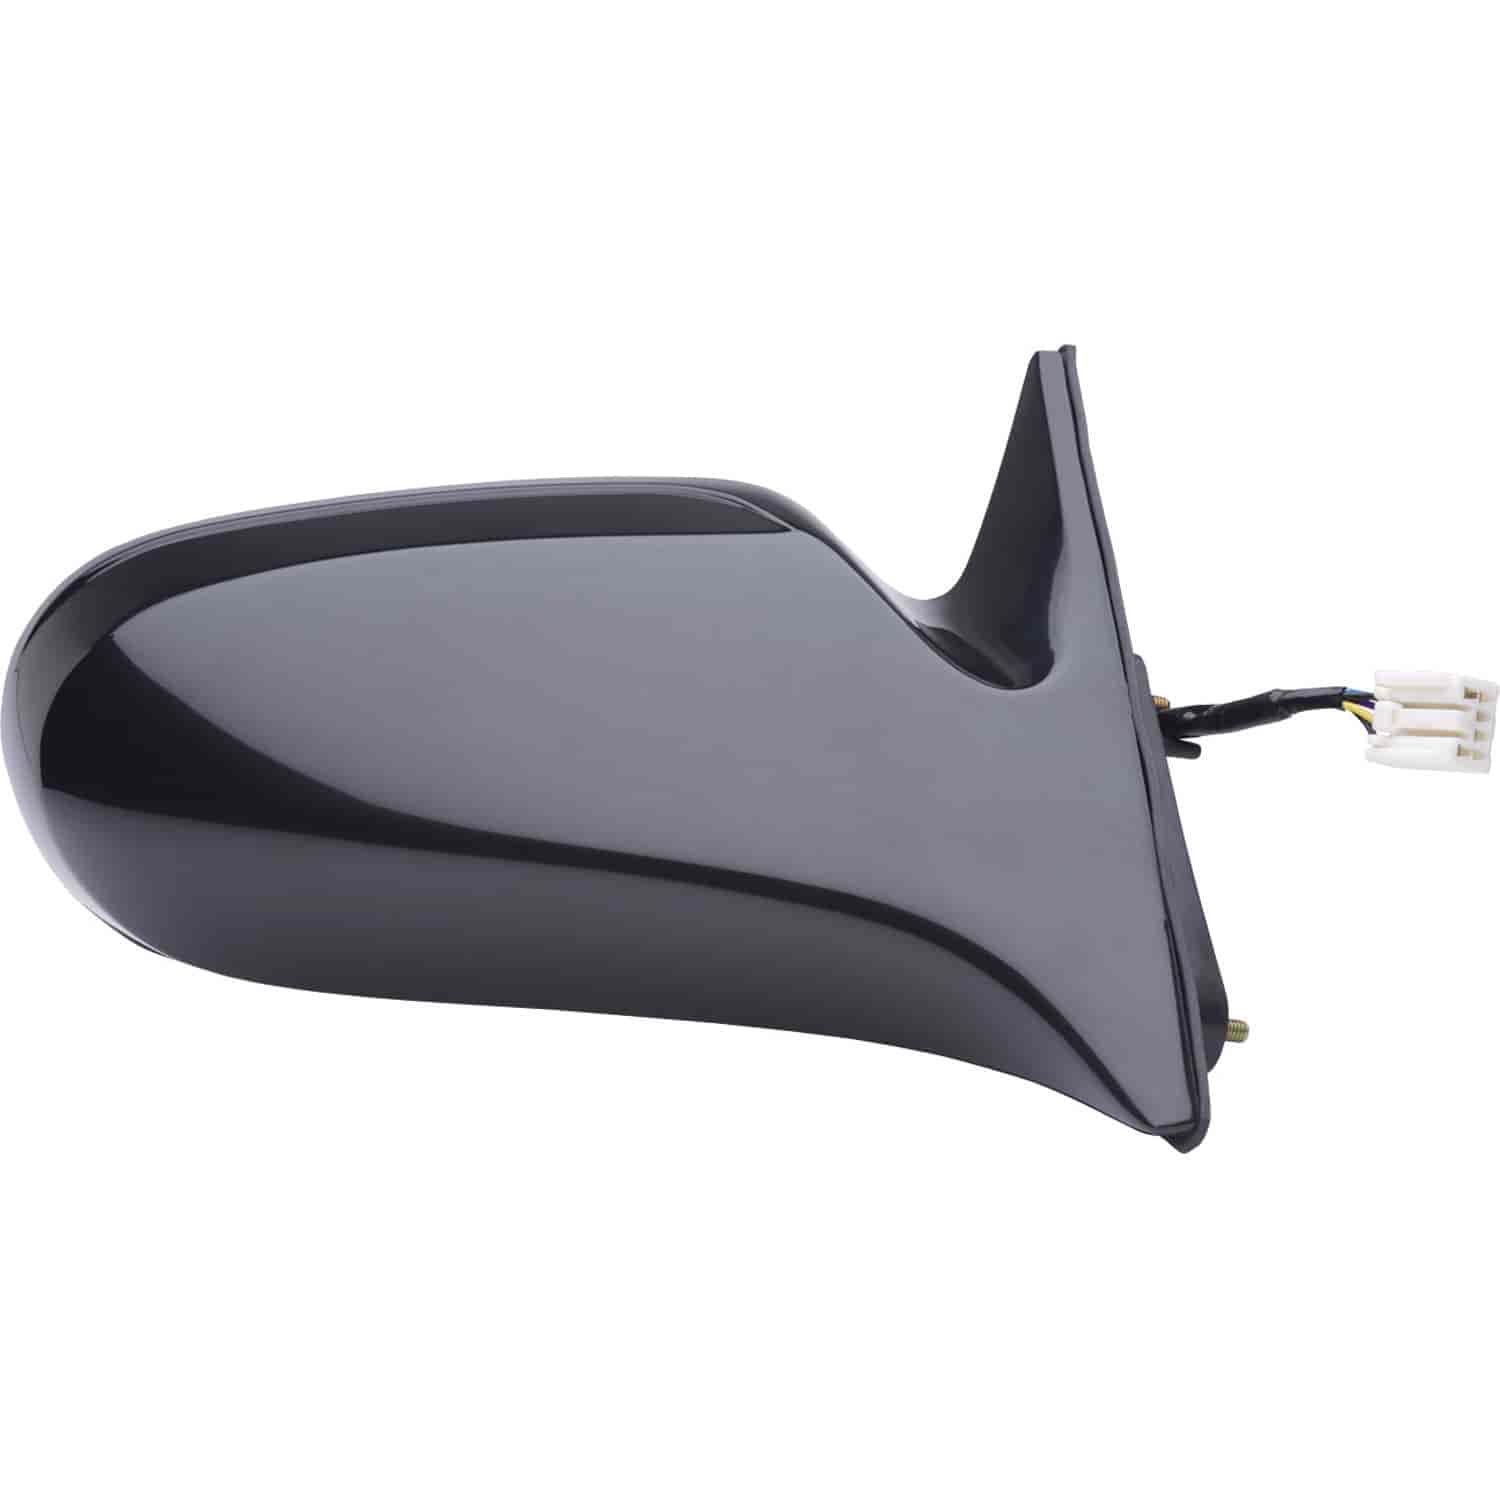 OEM Style Replacement mirror for 00-02 Mazda 626 passenger side mirror tested to fit and function li